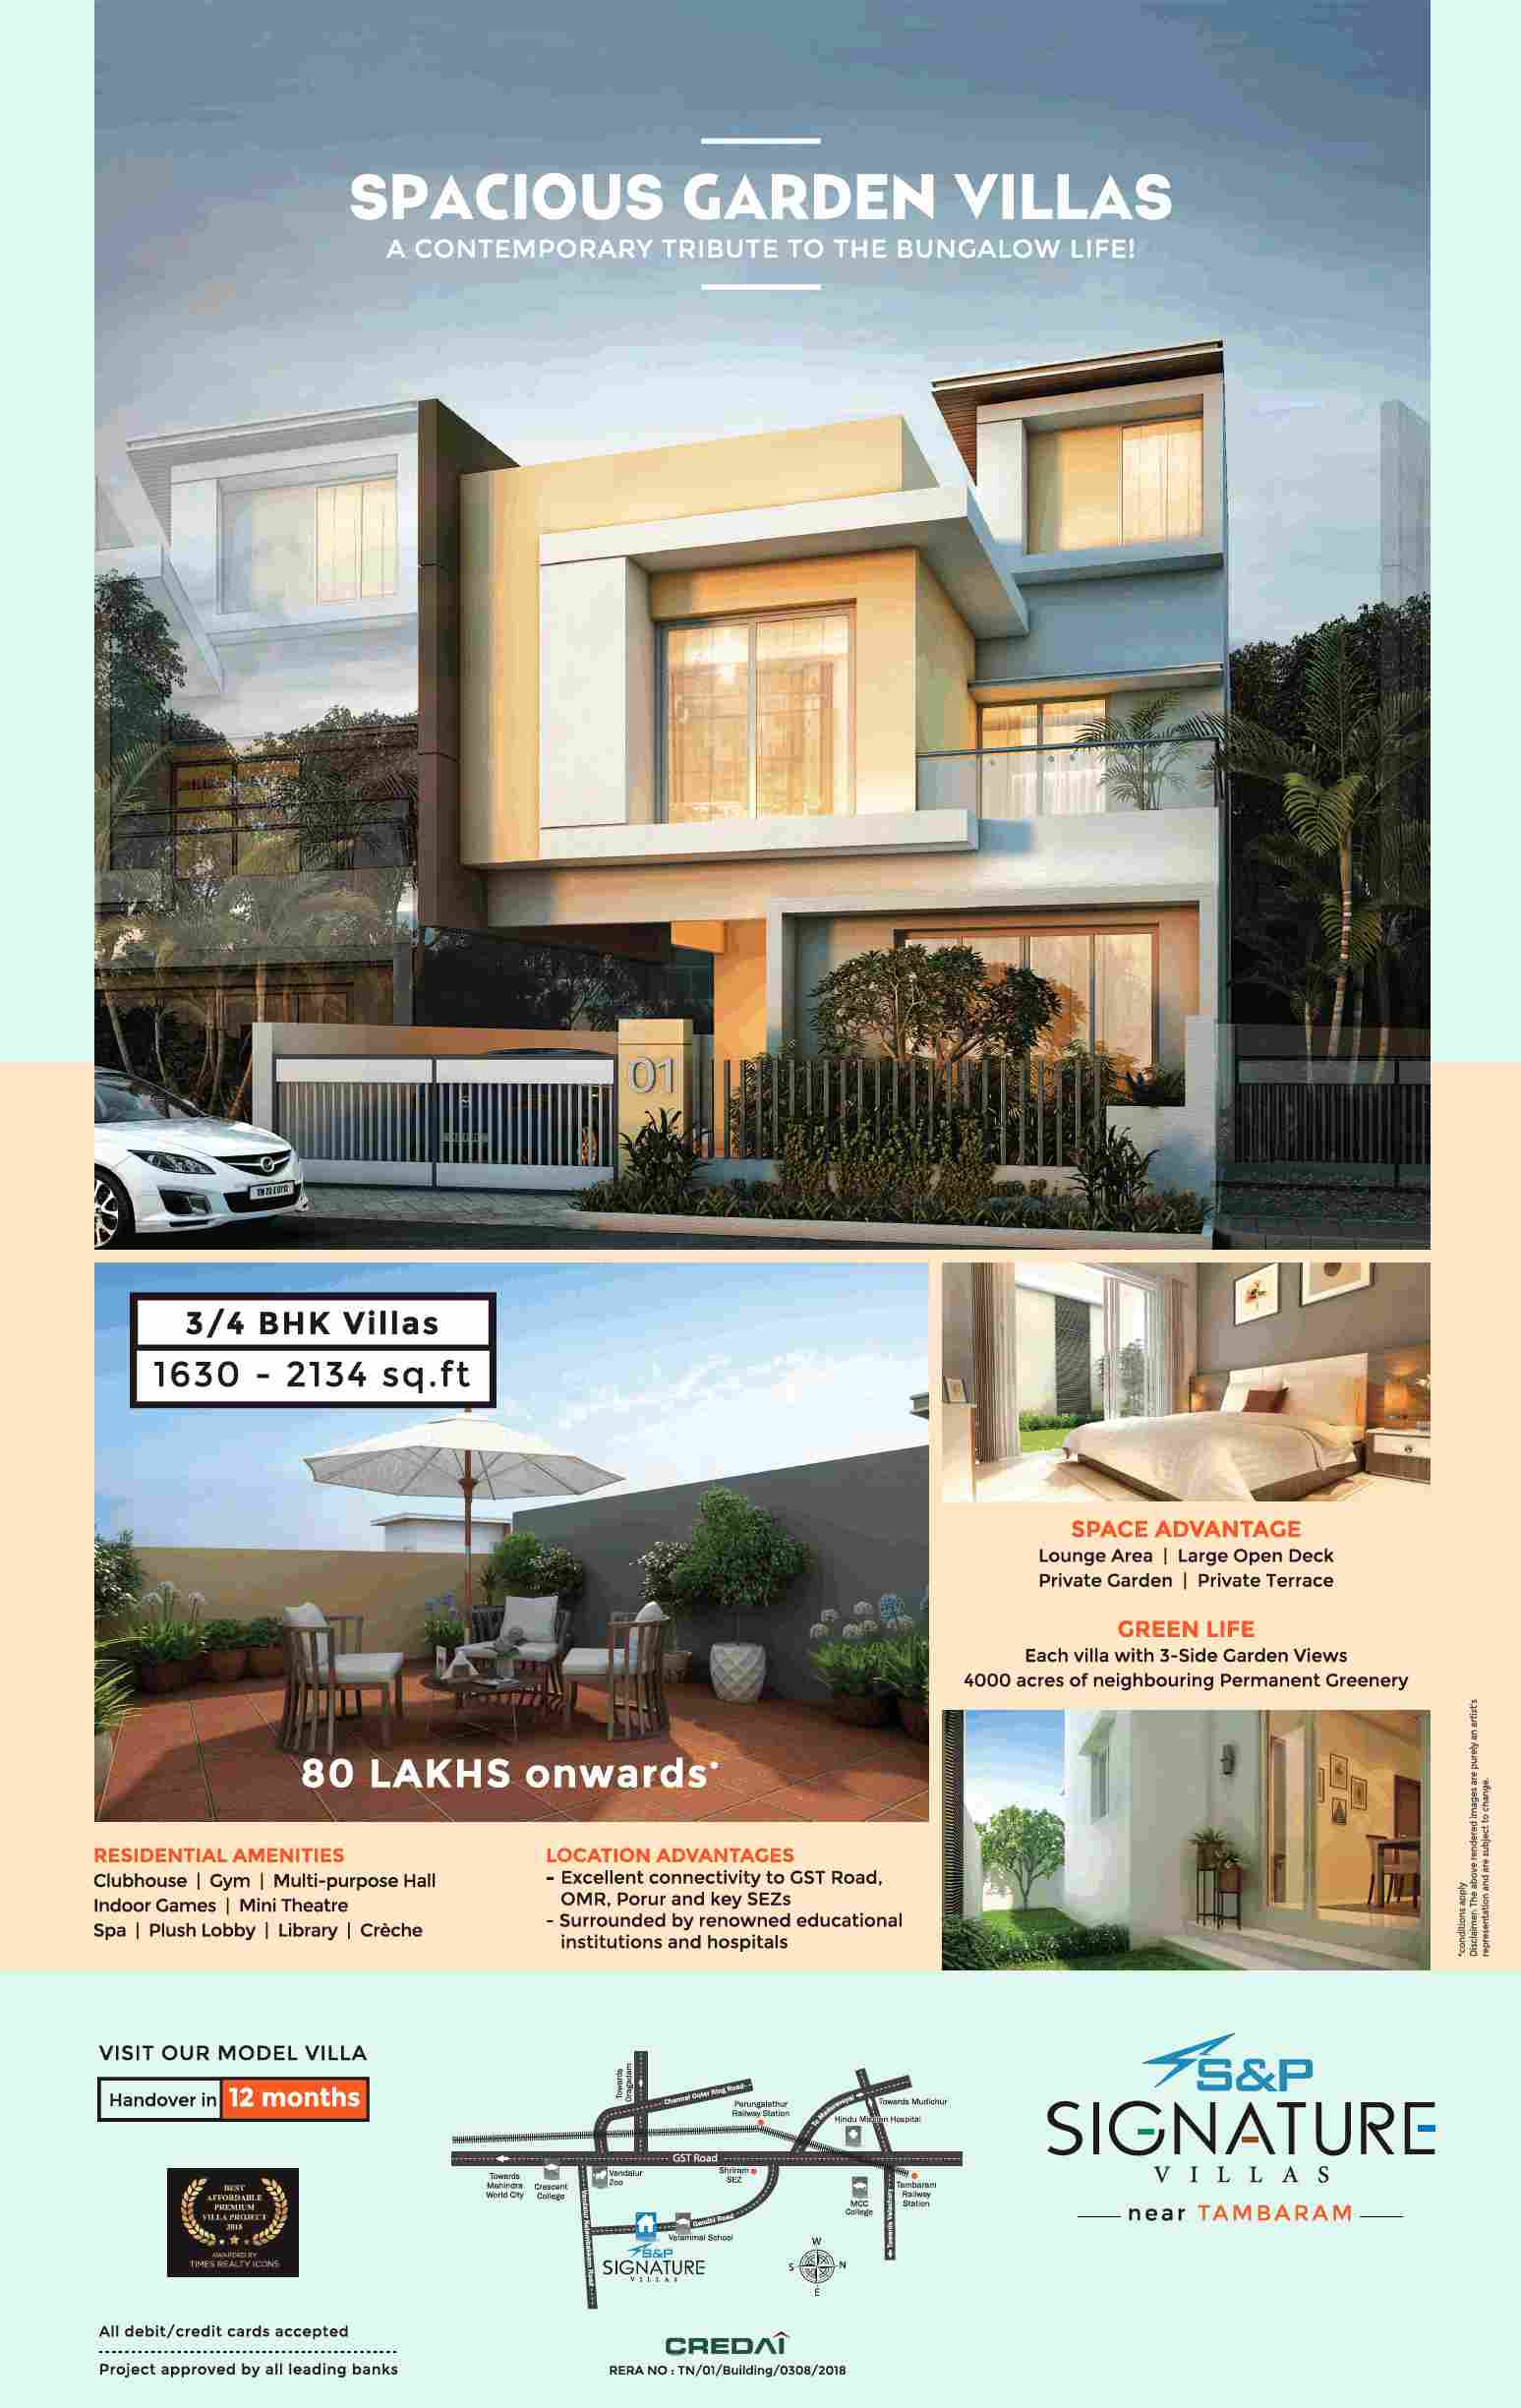 Model villas ready for visit at S&P Signature Villas in Chennai Update